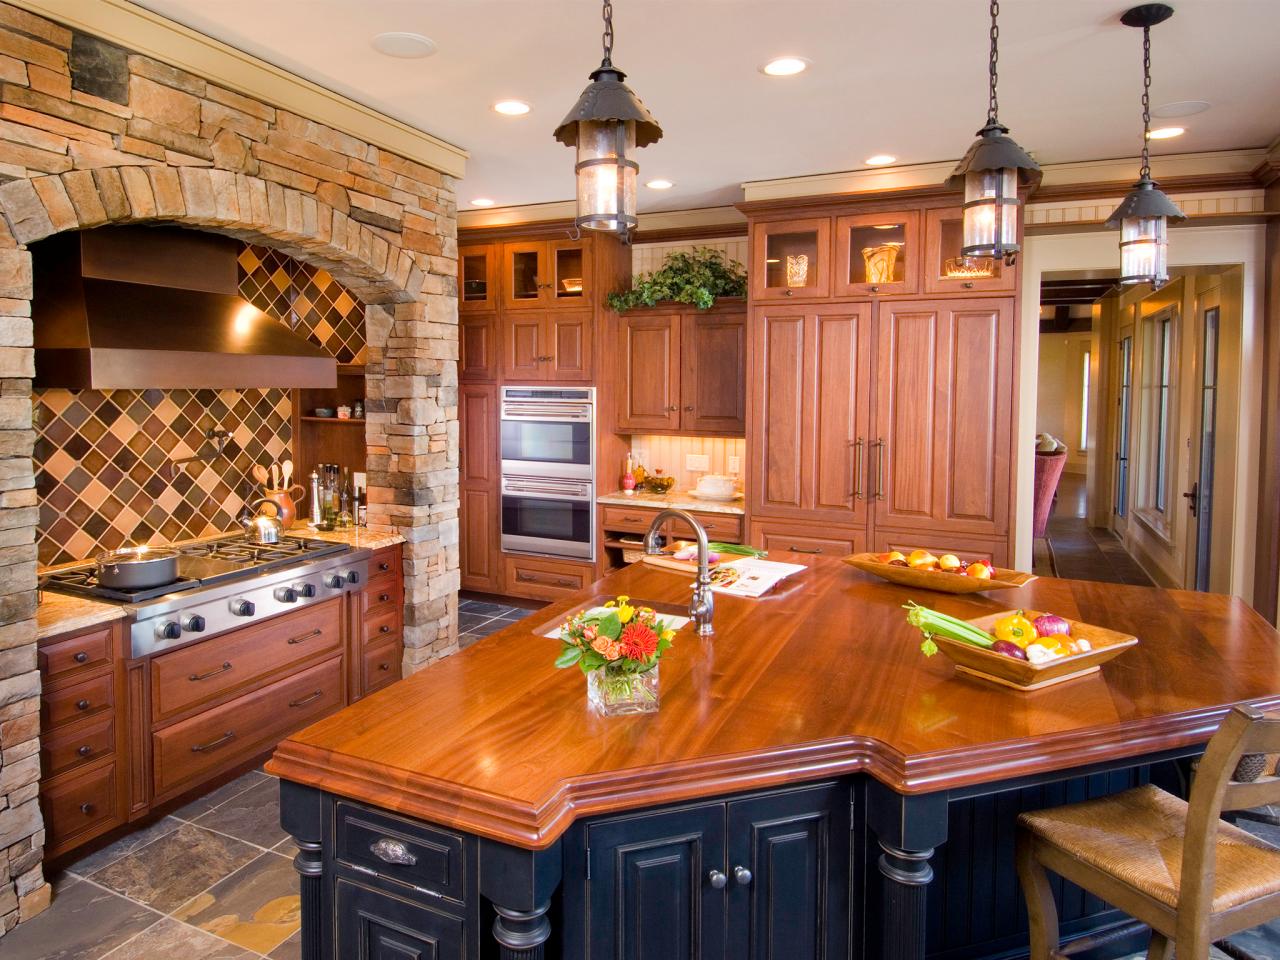 Charming and Classy Wooden Kitchen Countertops